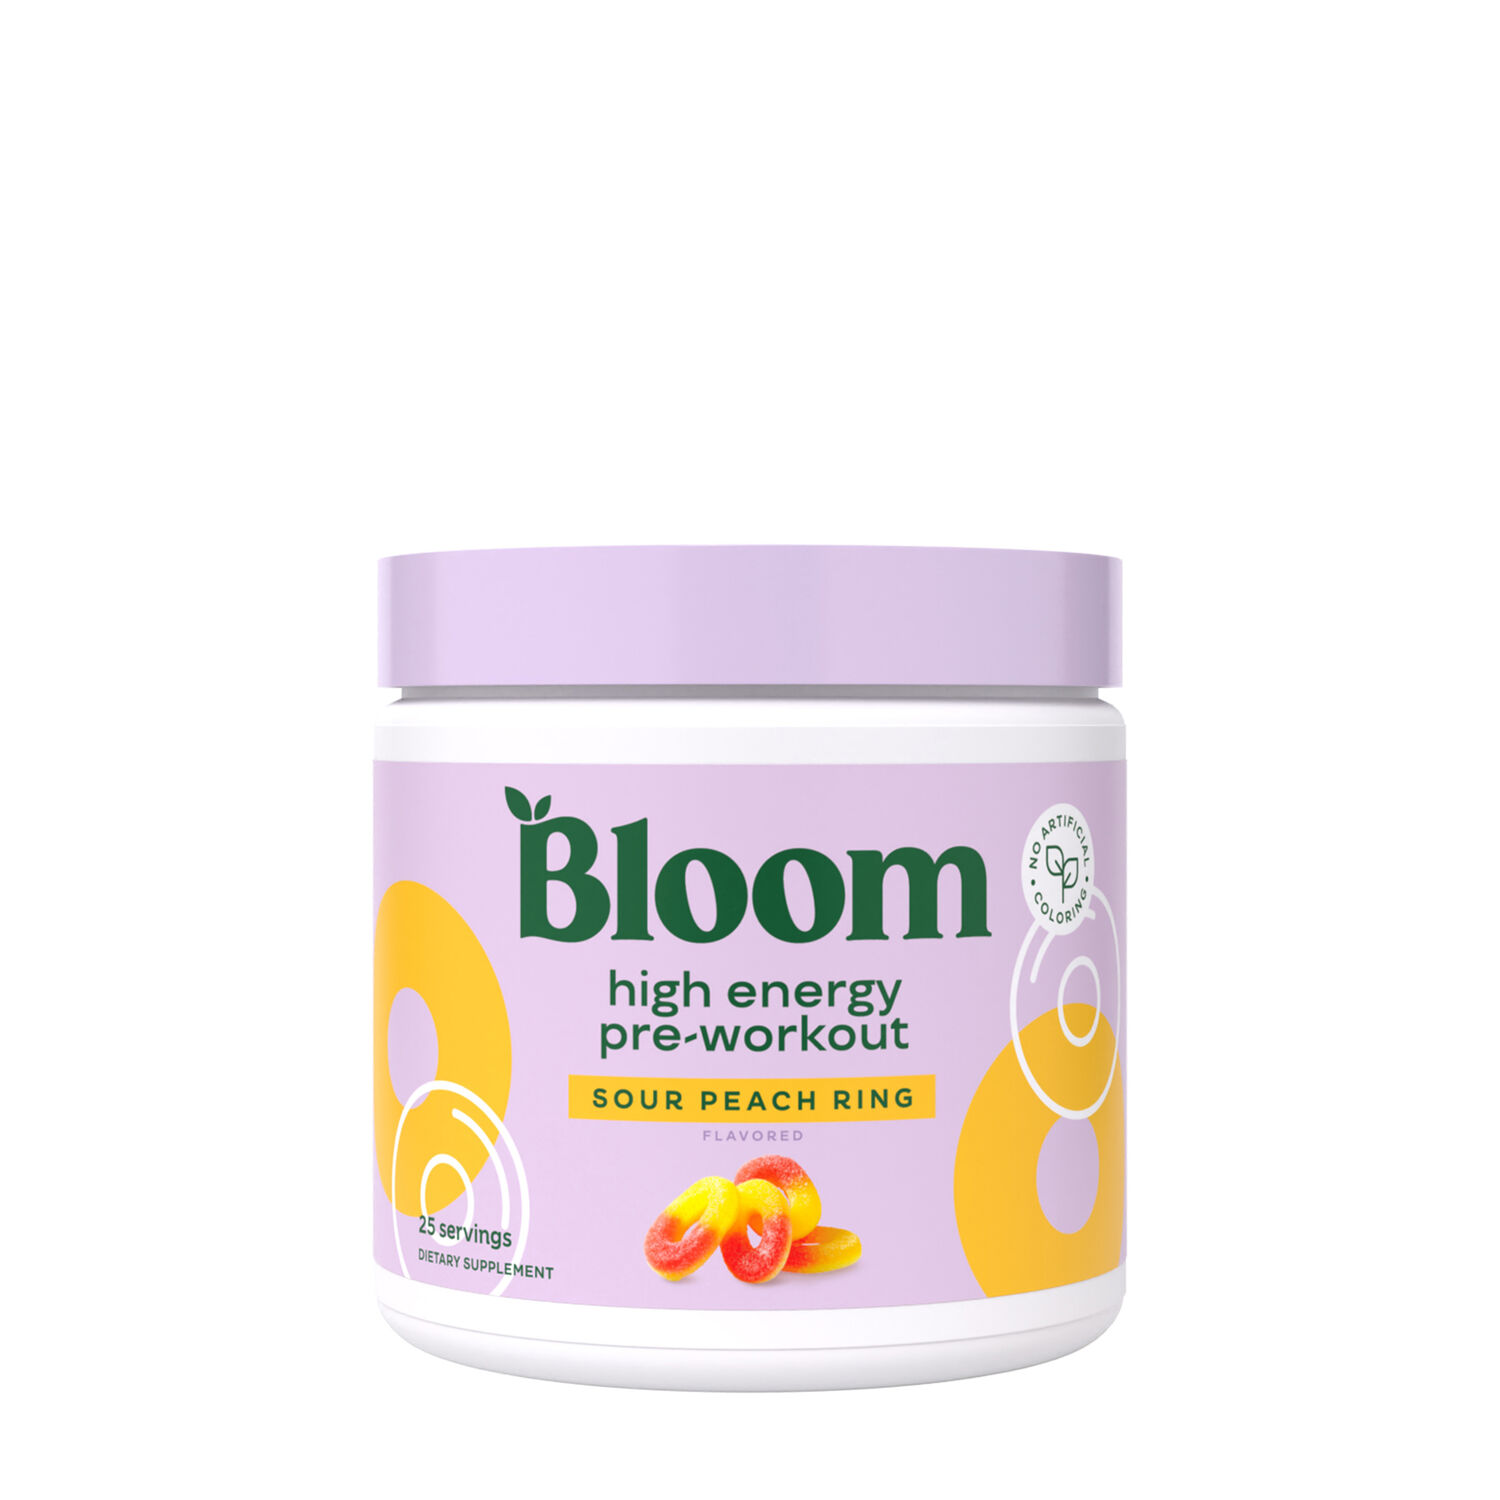 Bloom High Energy Pre-Workout - Sour Peach Ring (25 Servings)